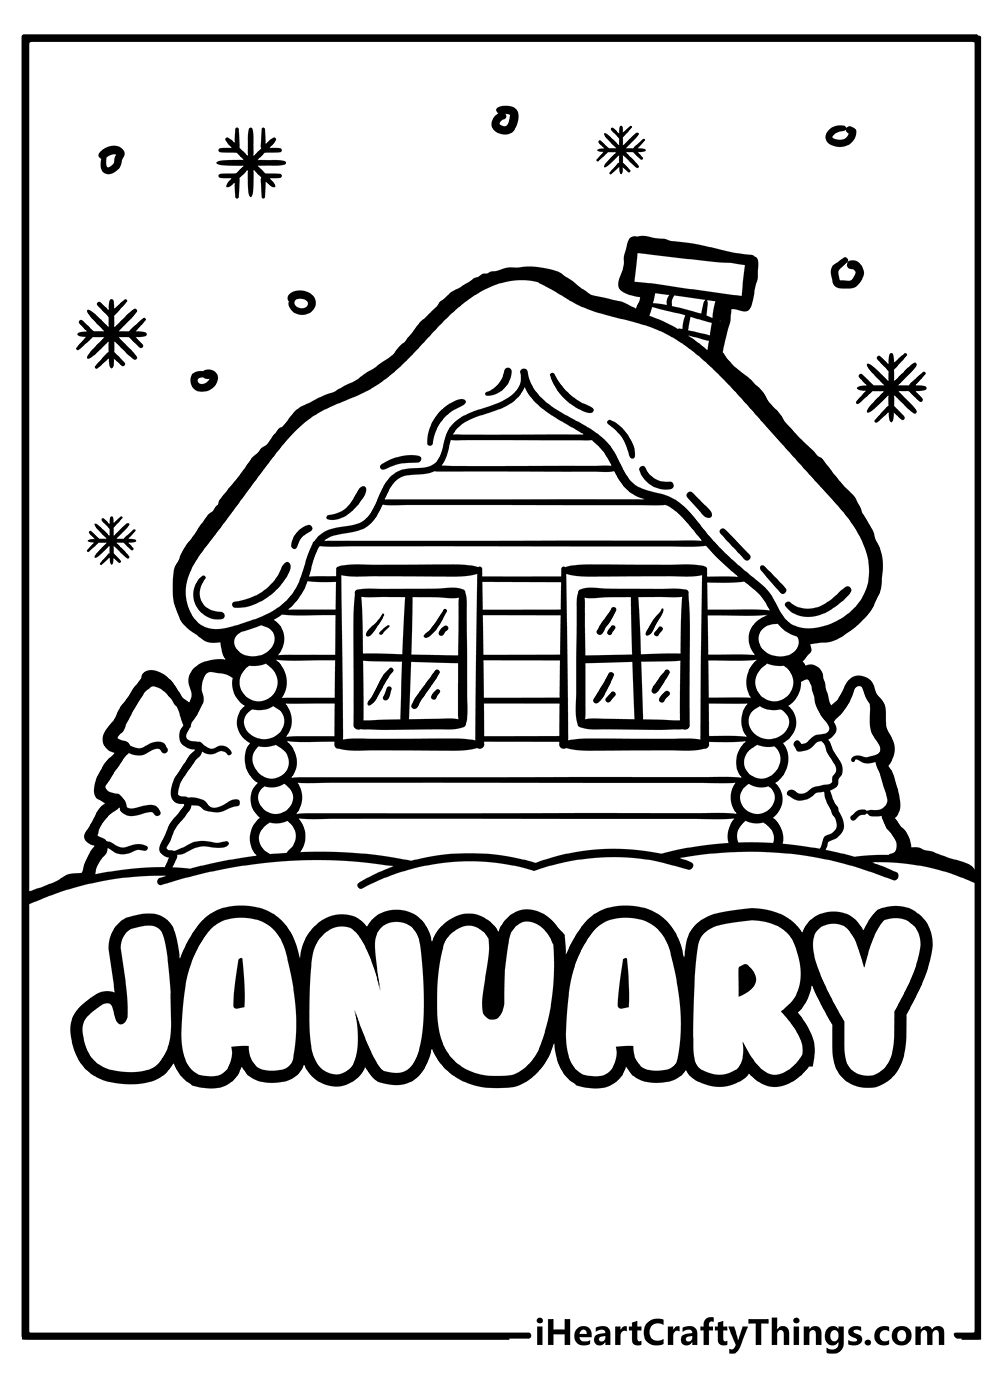 January Coloring Book for kids free printable